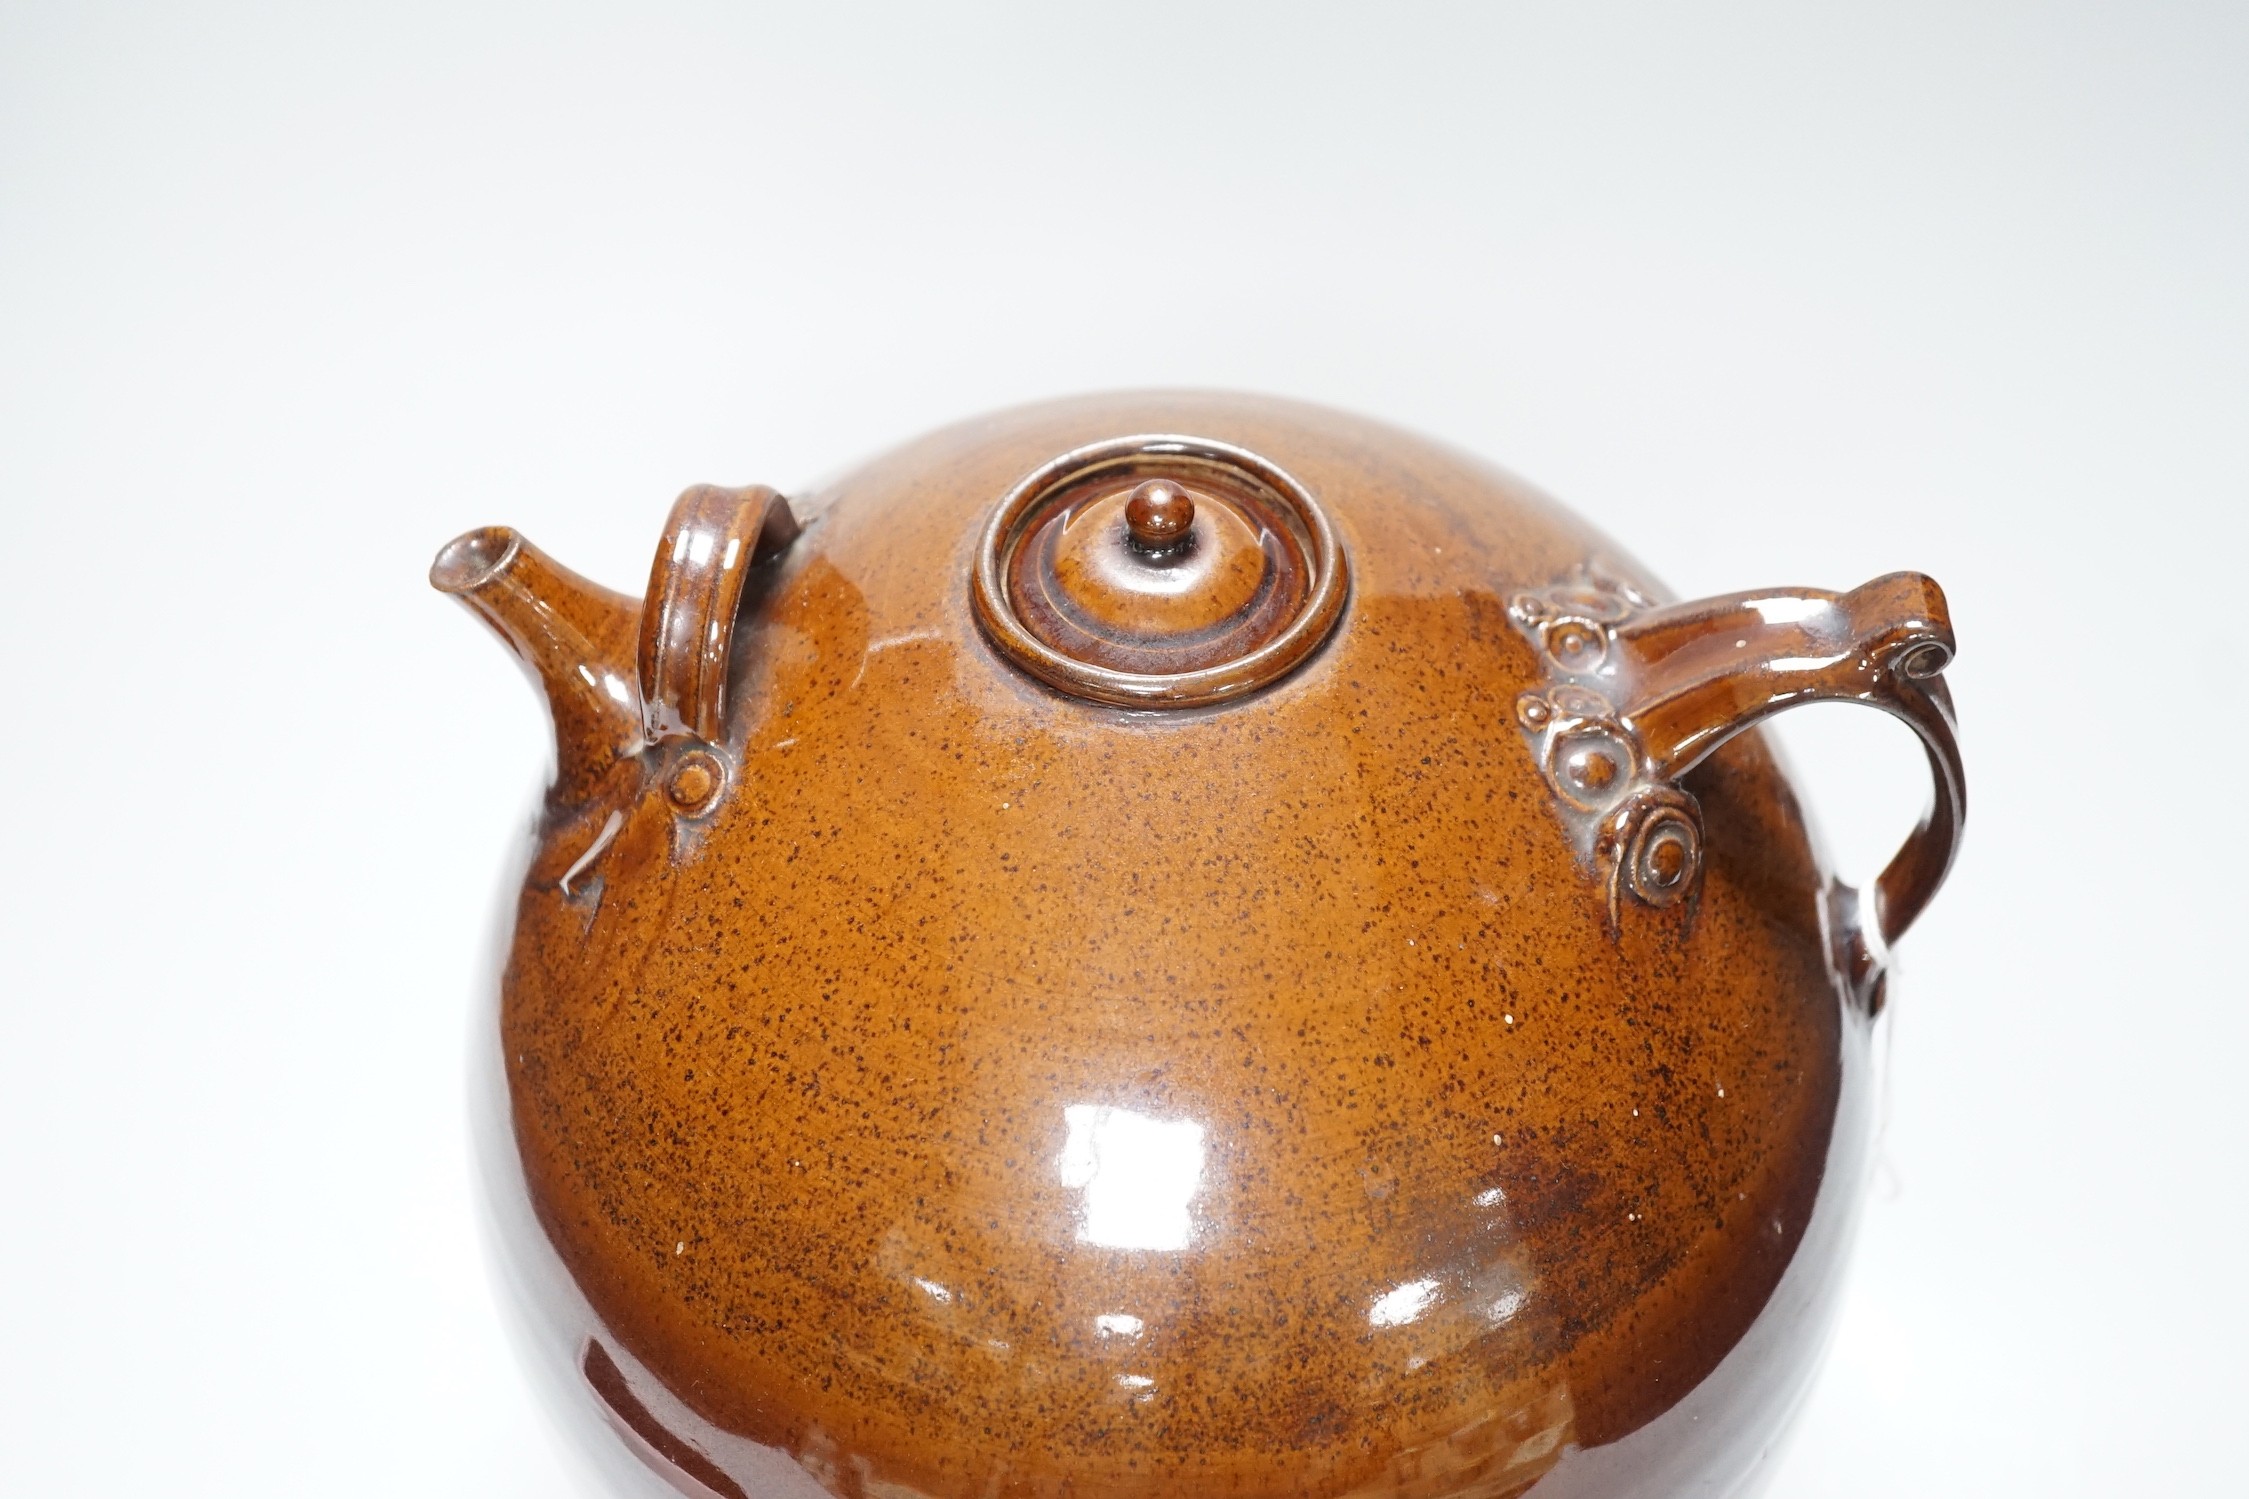 A Doug Bignell 'Alice in Wonderland' brown glazed teapot (a unique piece commissioned by the current owner), 30cms